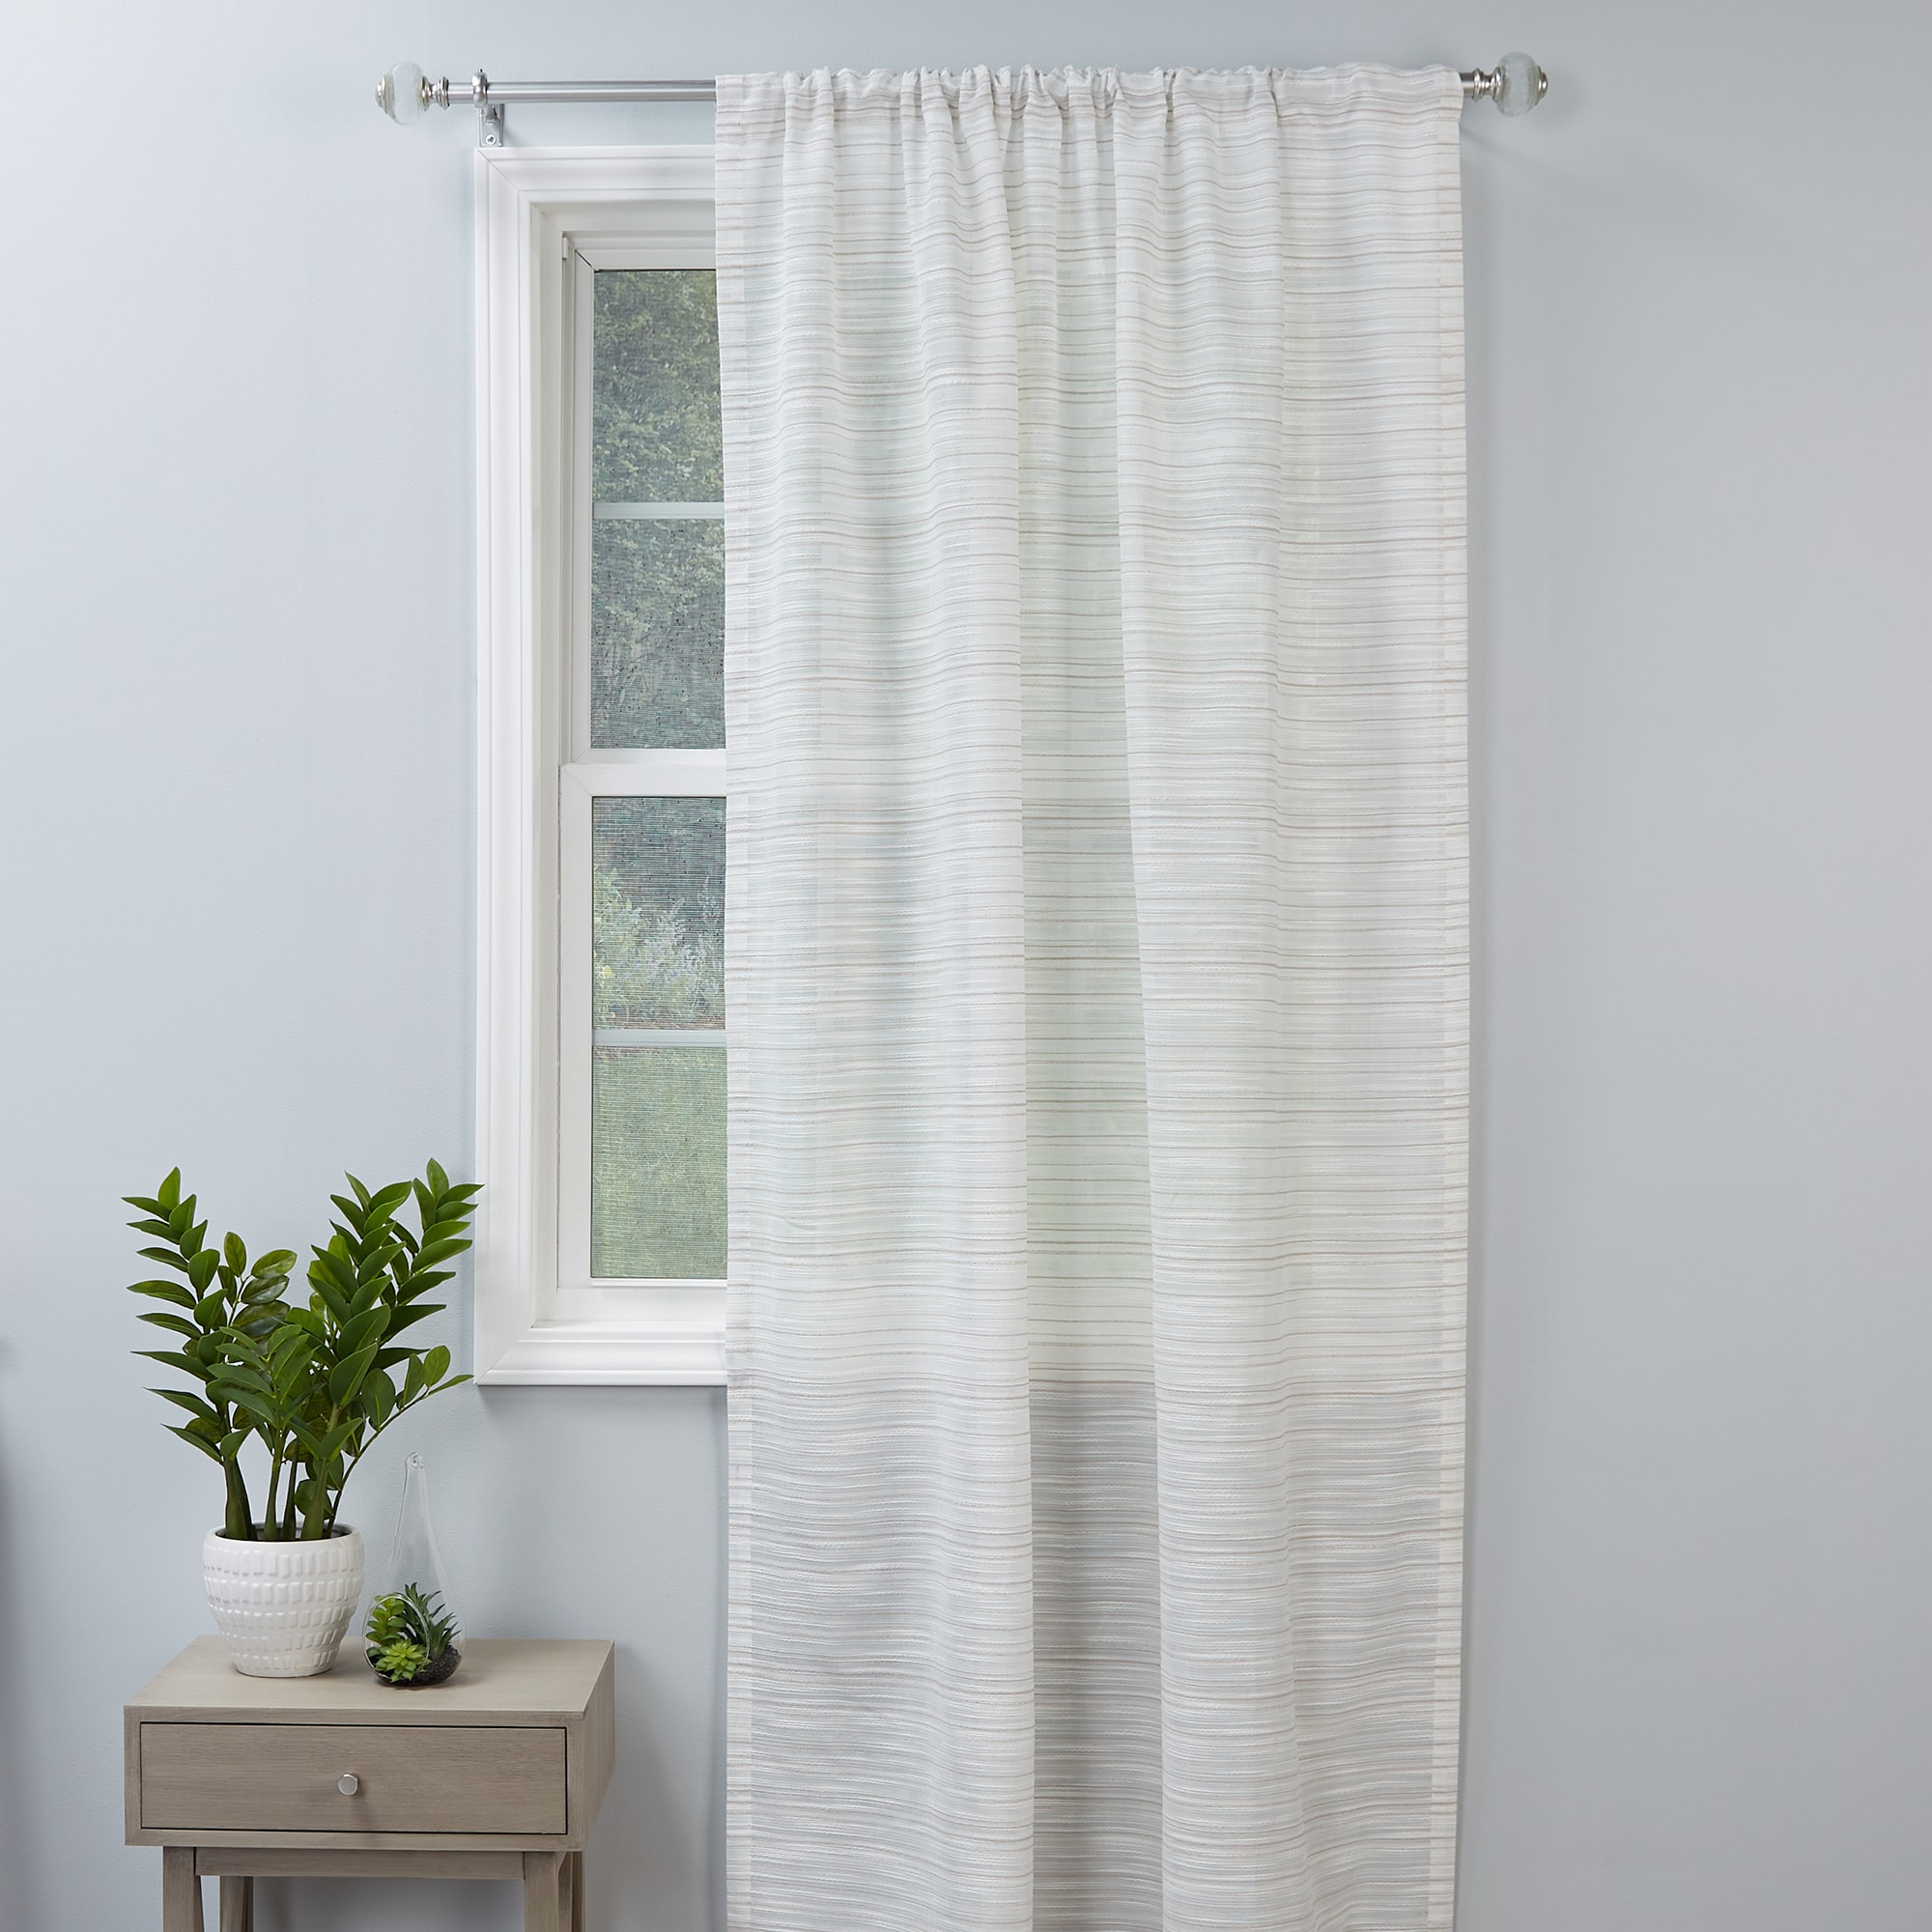 allen Rod & Drapes roth 84-in Single department Curtain Pocket at the Light Filtering Curtains + Taupe in Panel